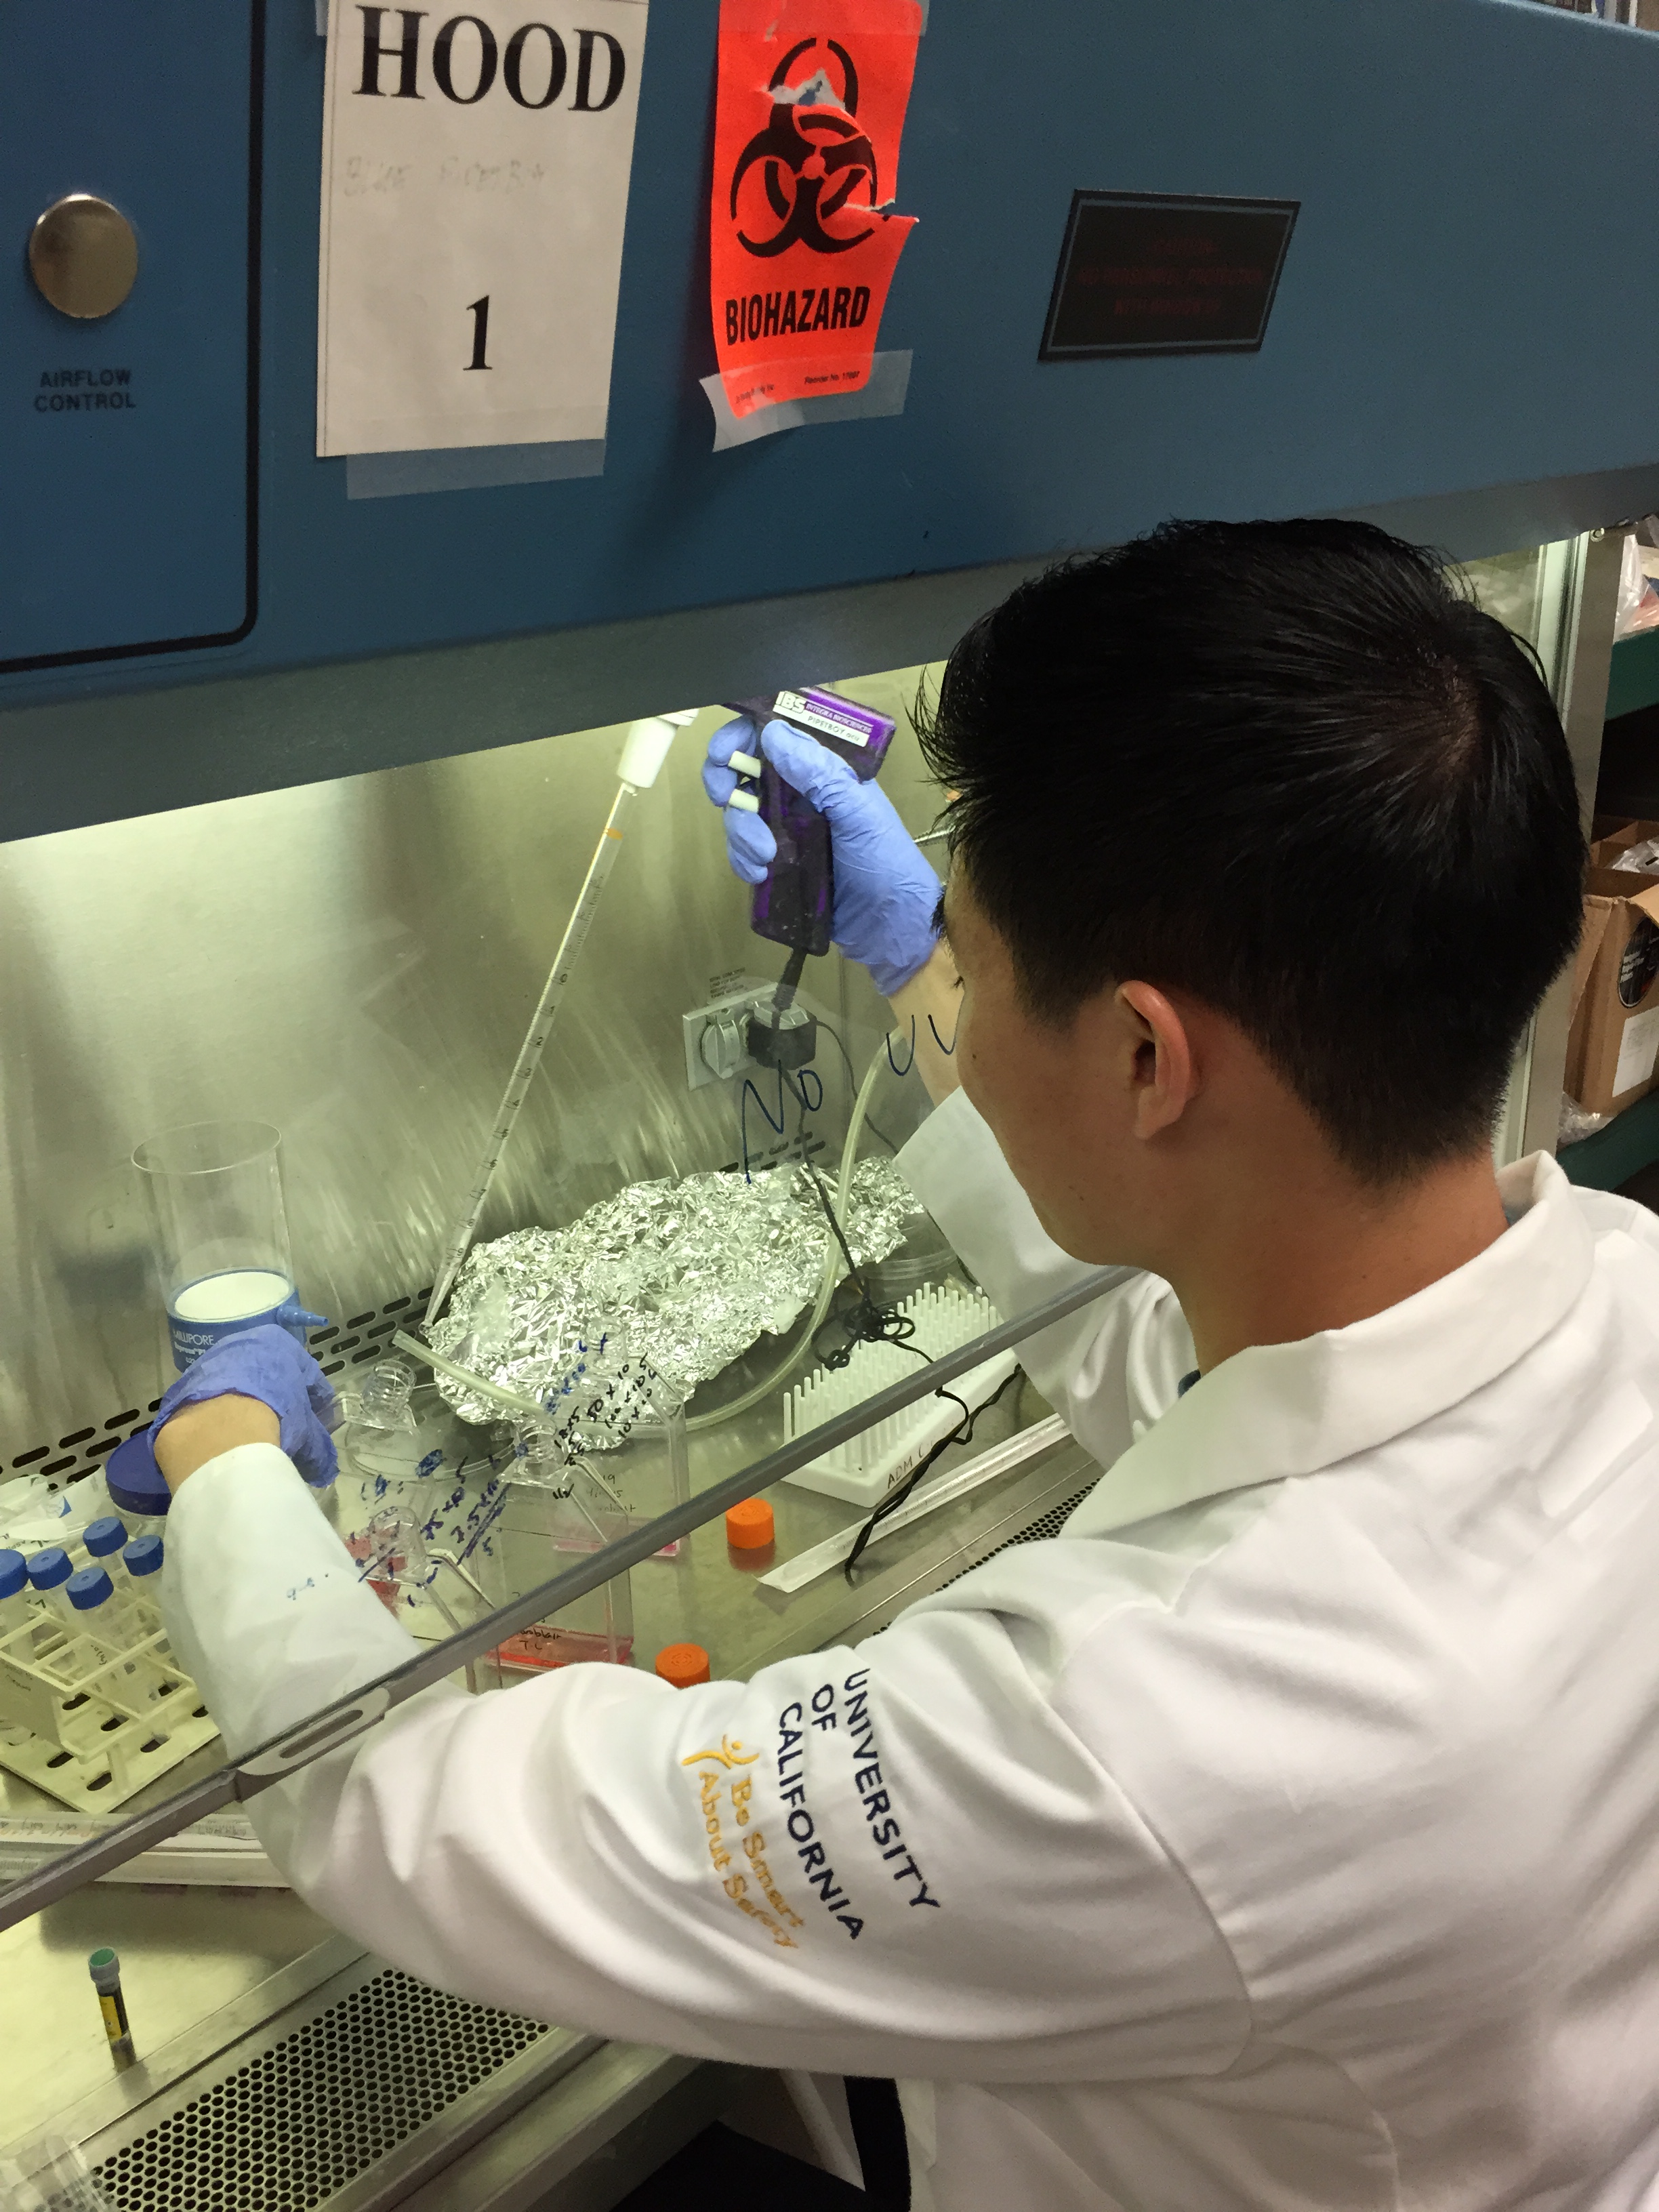 Timothy Lee does Disease research